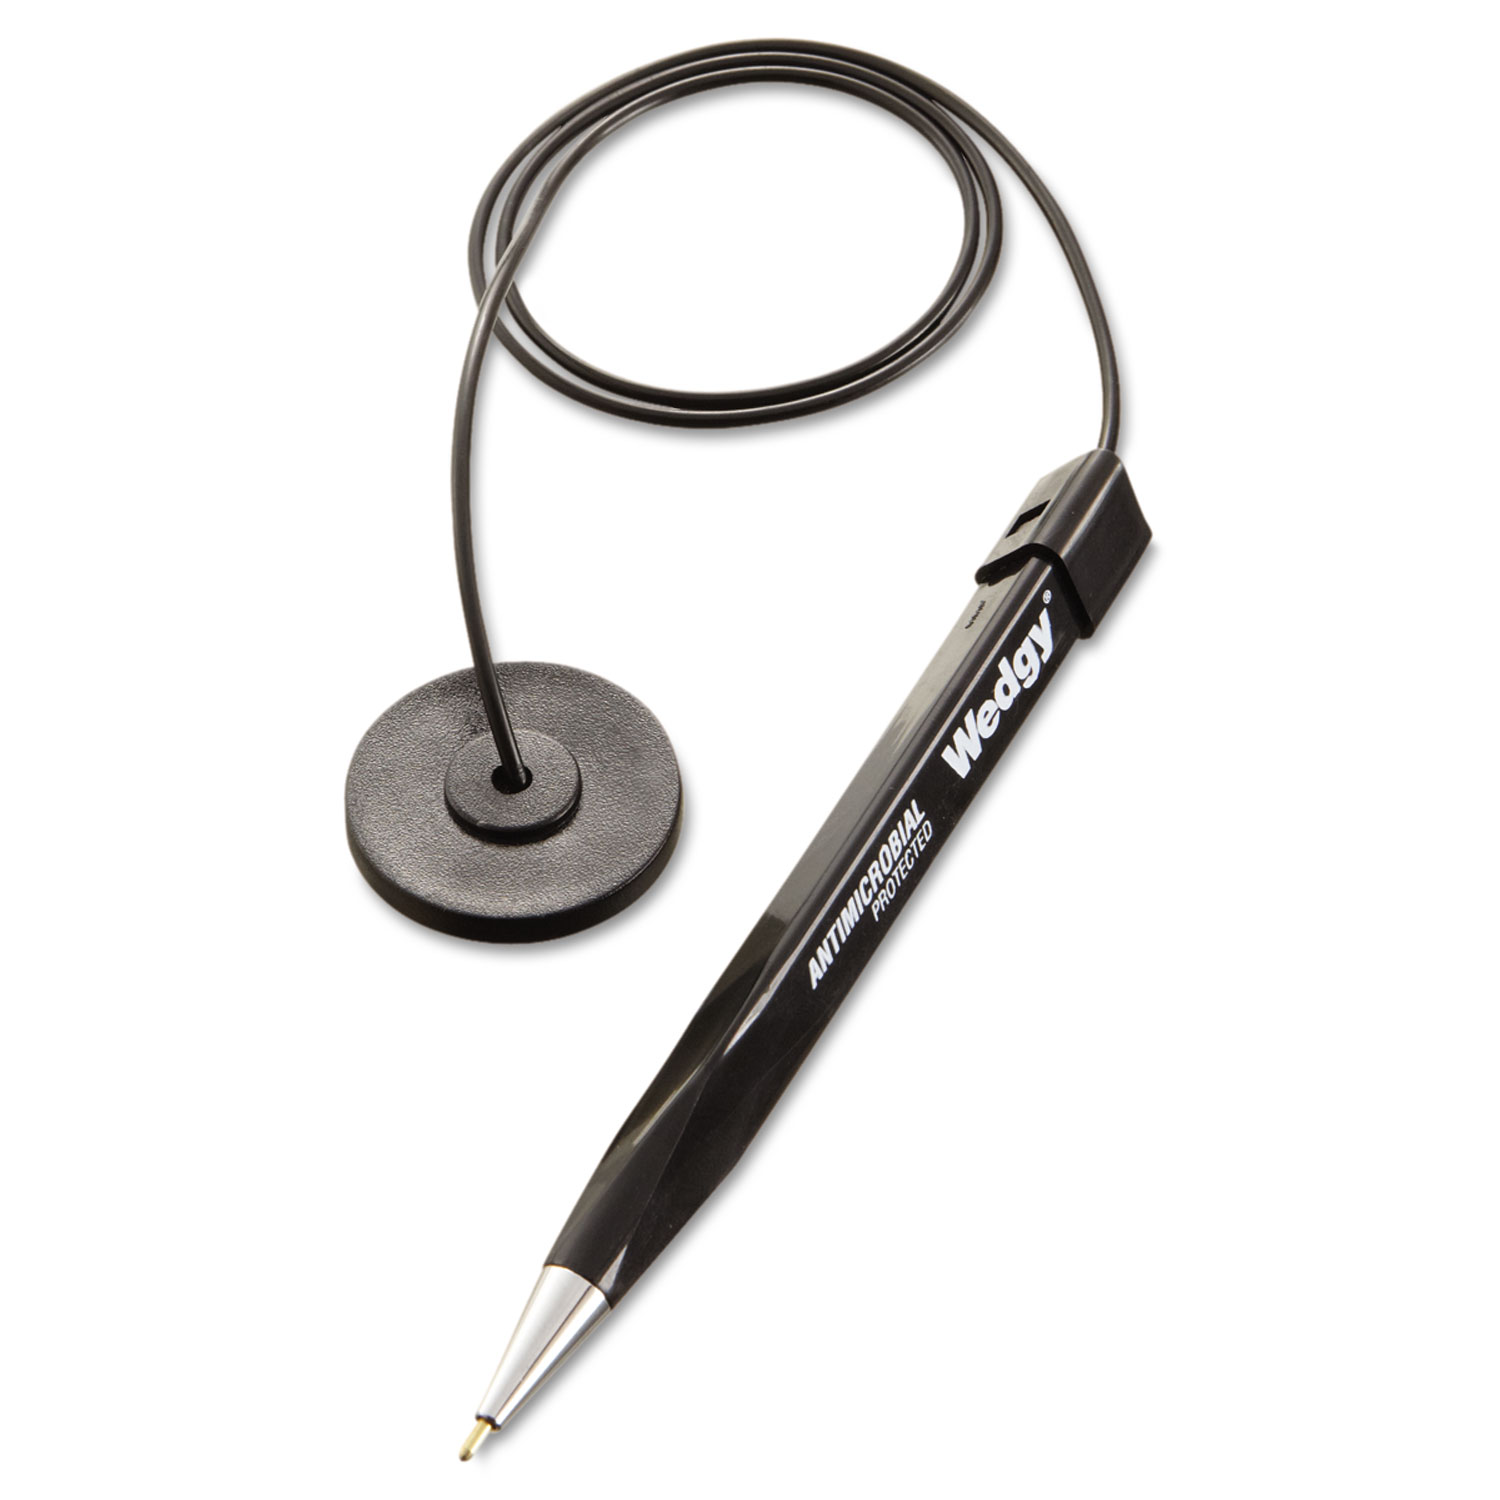  MMF Industries 28408 Wedgy Antimicrobial Ballpoint Counter Pen w/Round Base, 1mm, Blue Ink, Black Barrel (MMF28408) 